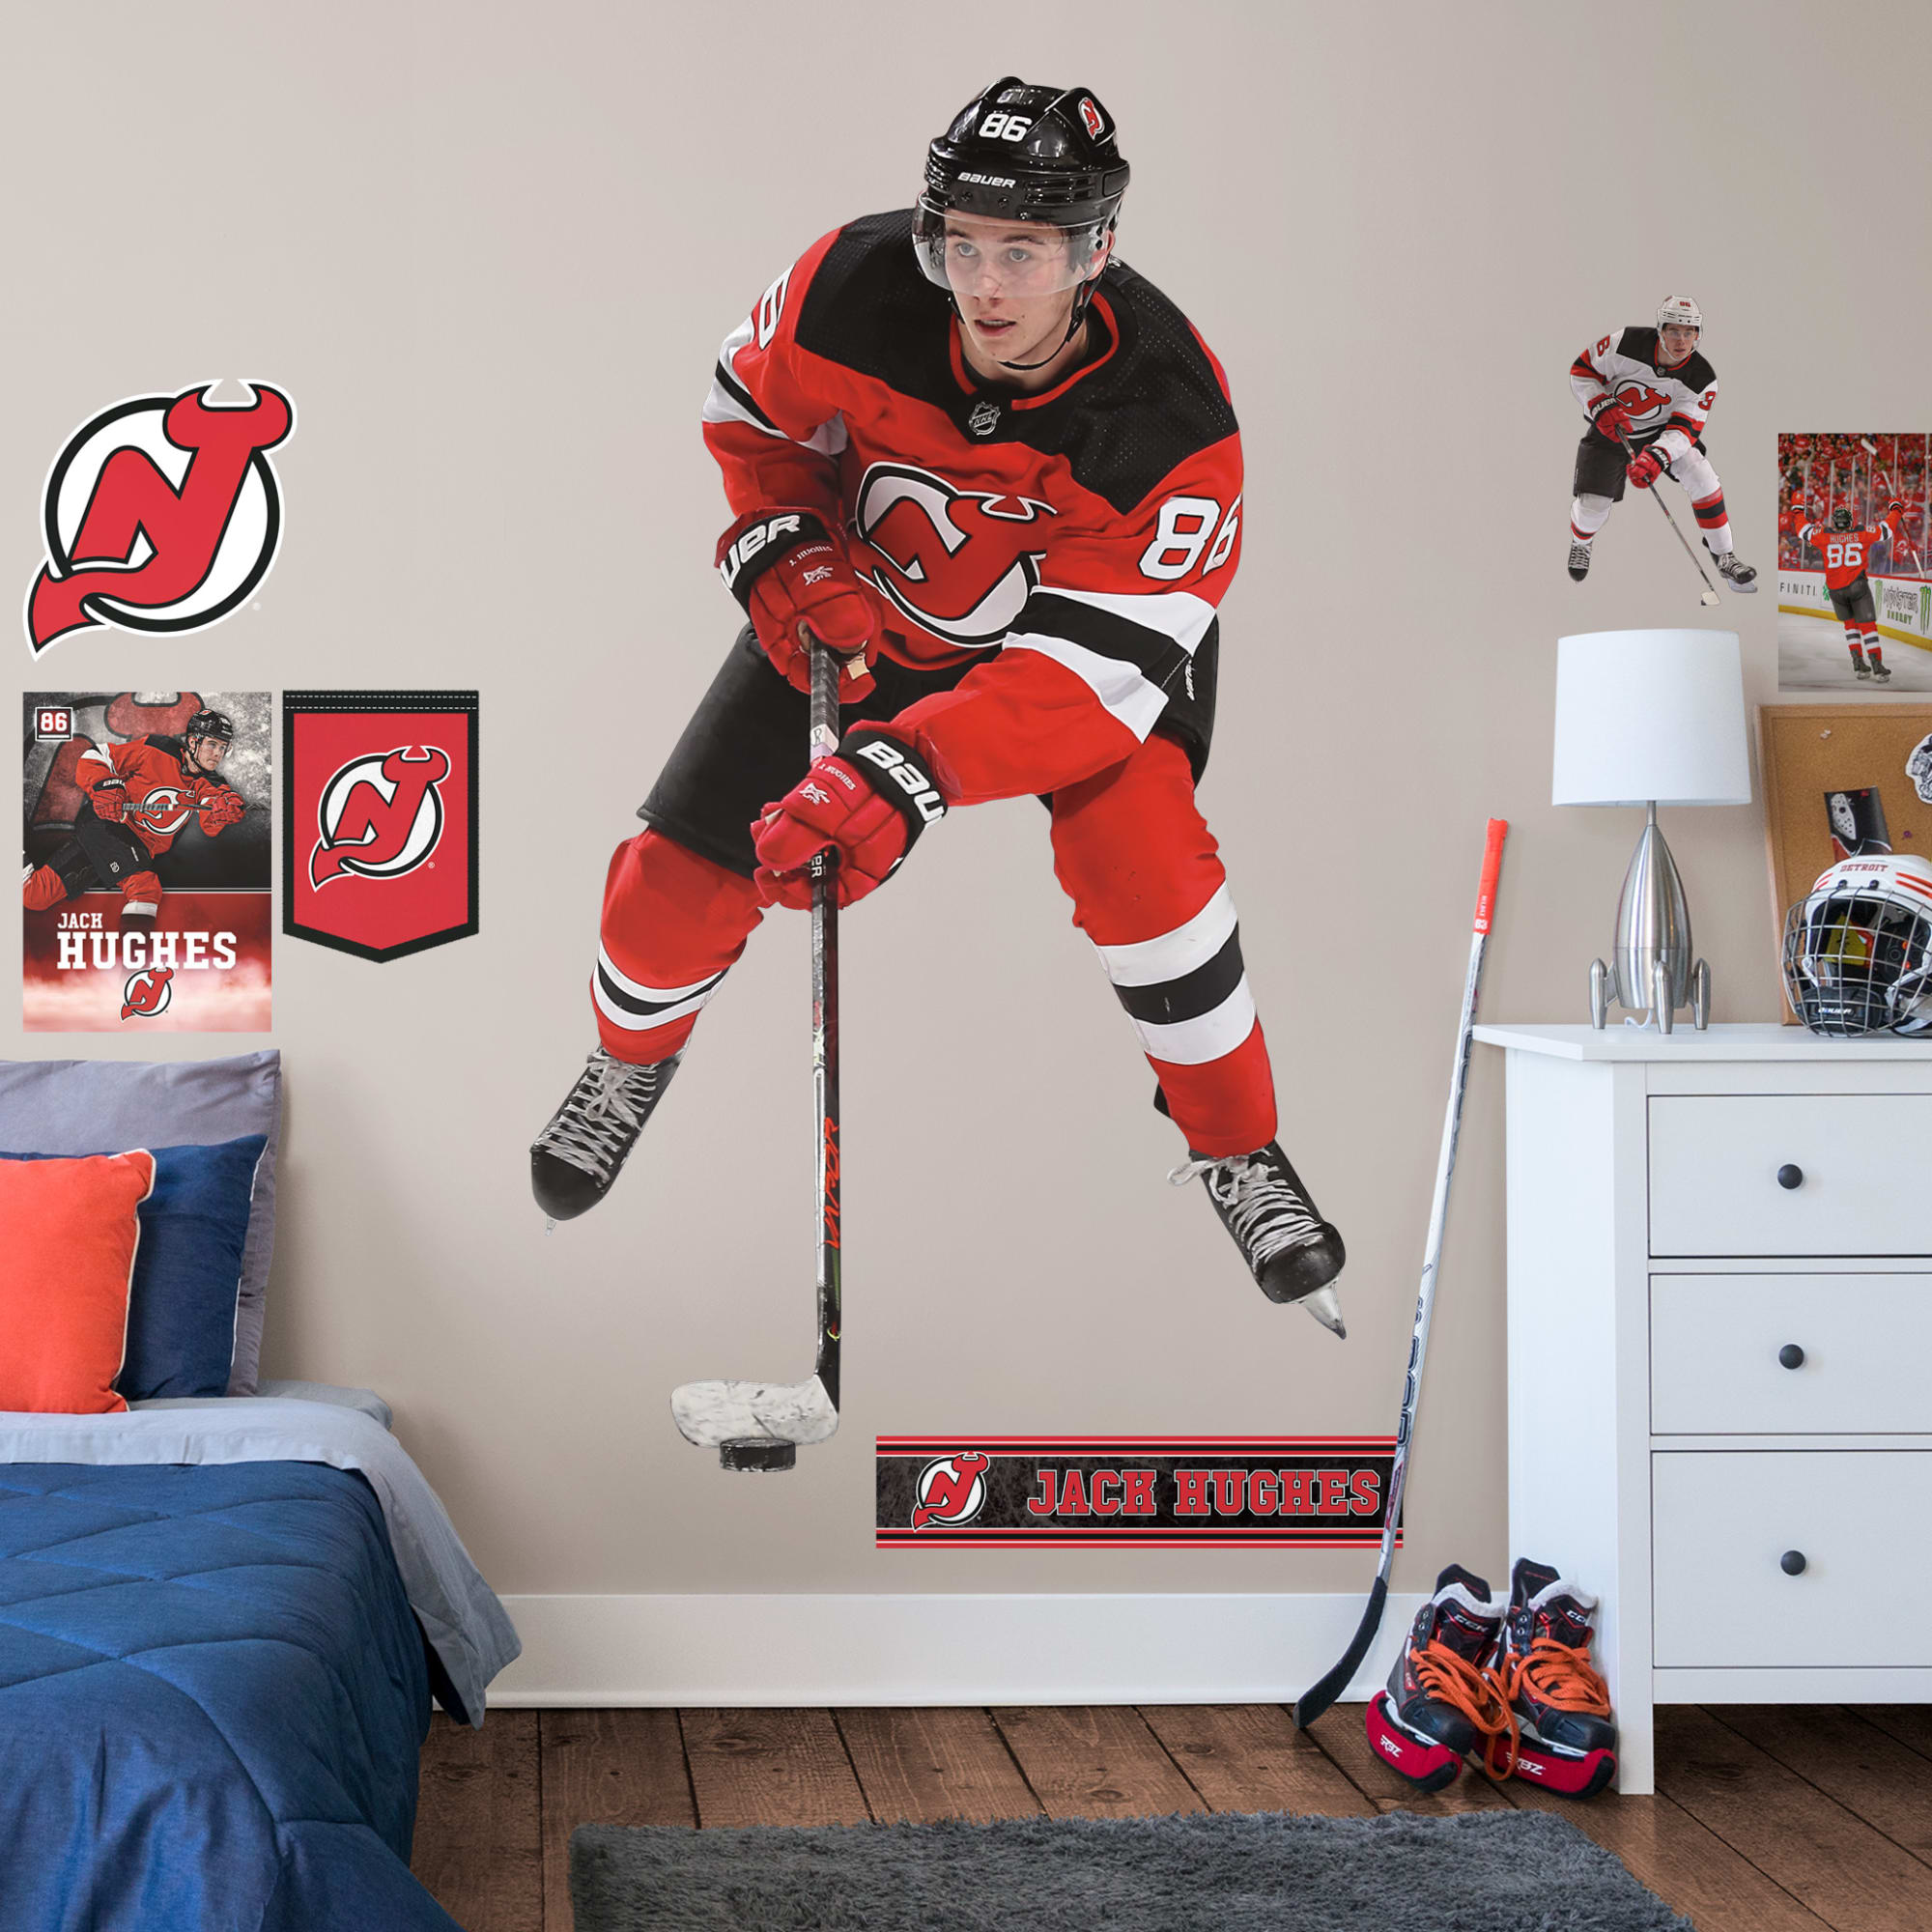 Jack Hughes for New Jersey Devils - Officially Licensed NHL Removable Wall Decal Life-Size Athlete + 8 Decals (46"W x 78"H) by F